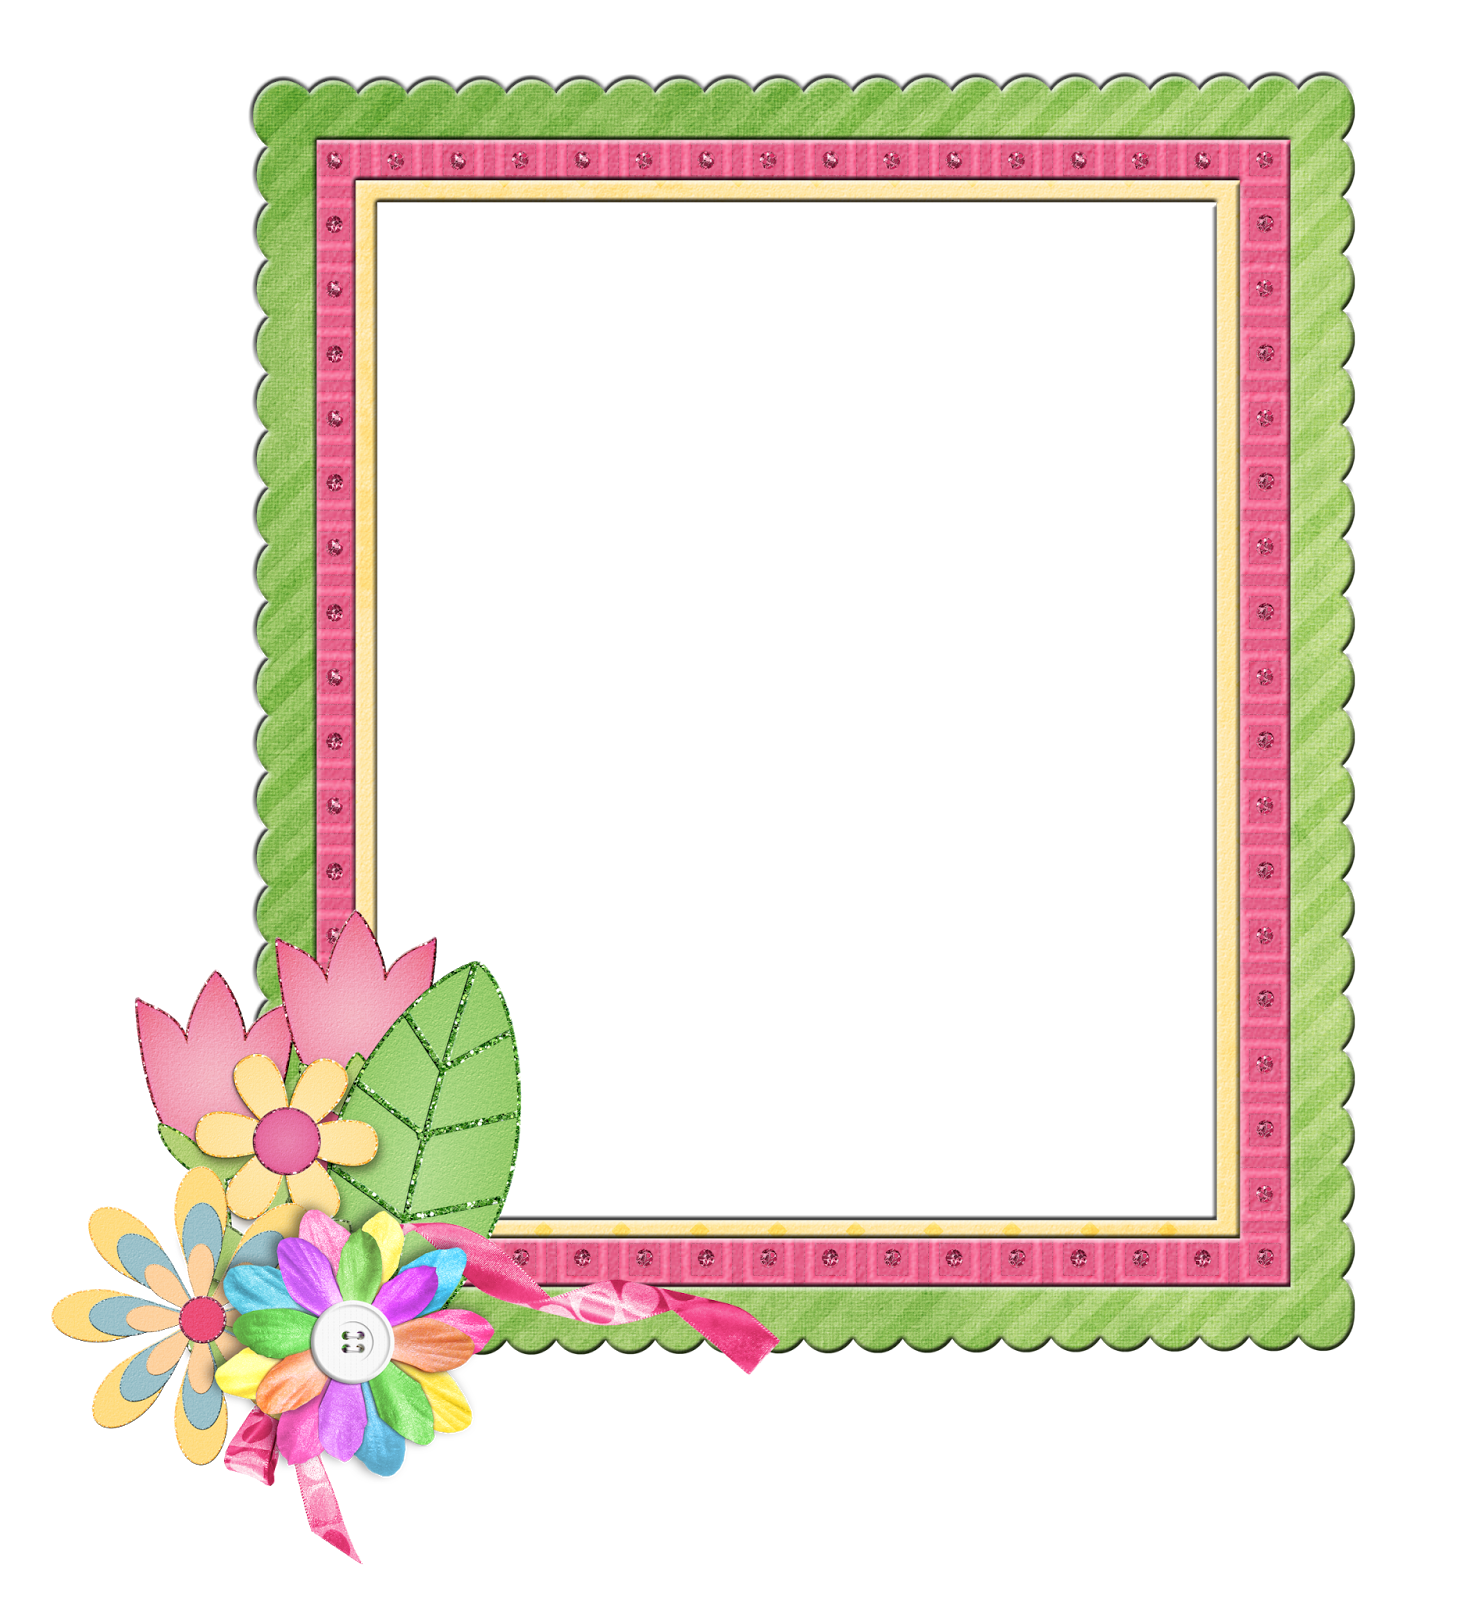 Nice Flowers Free Printable Frames or Cards. Oh My Fiesta! in english